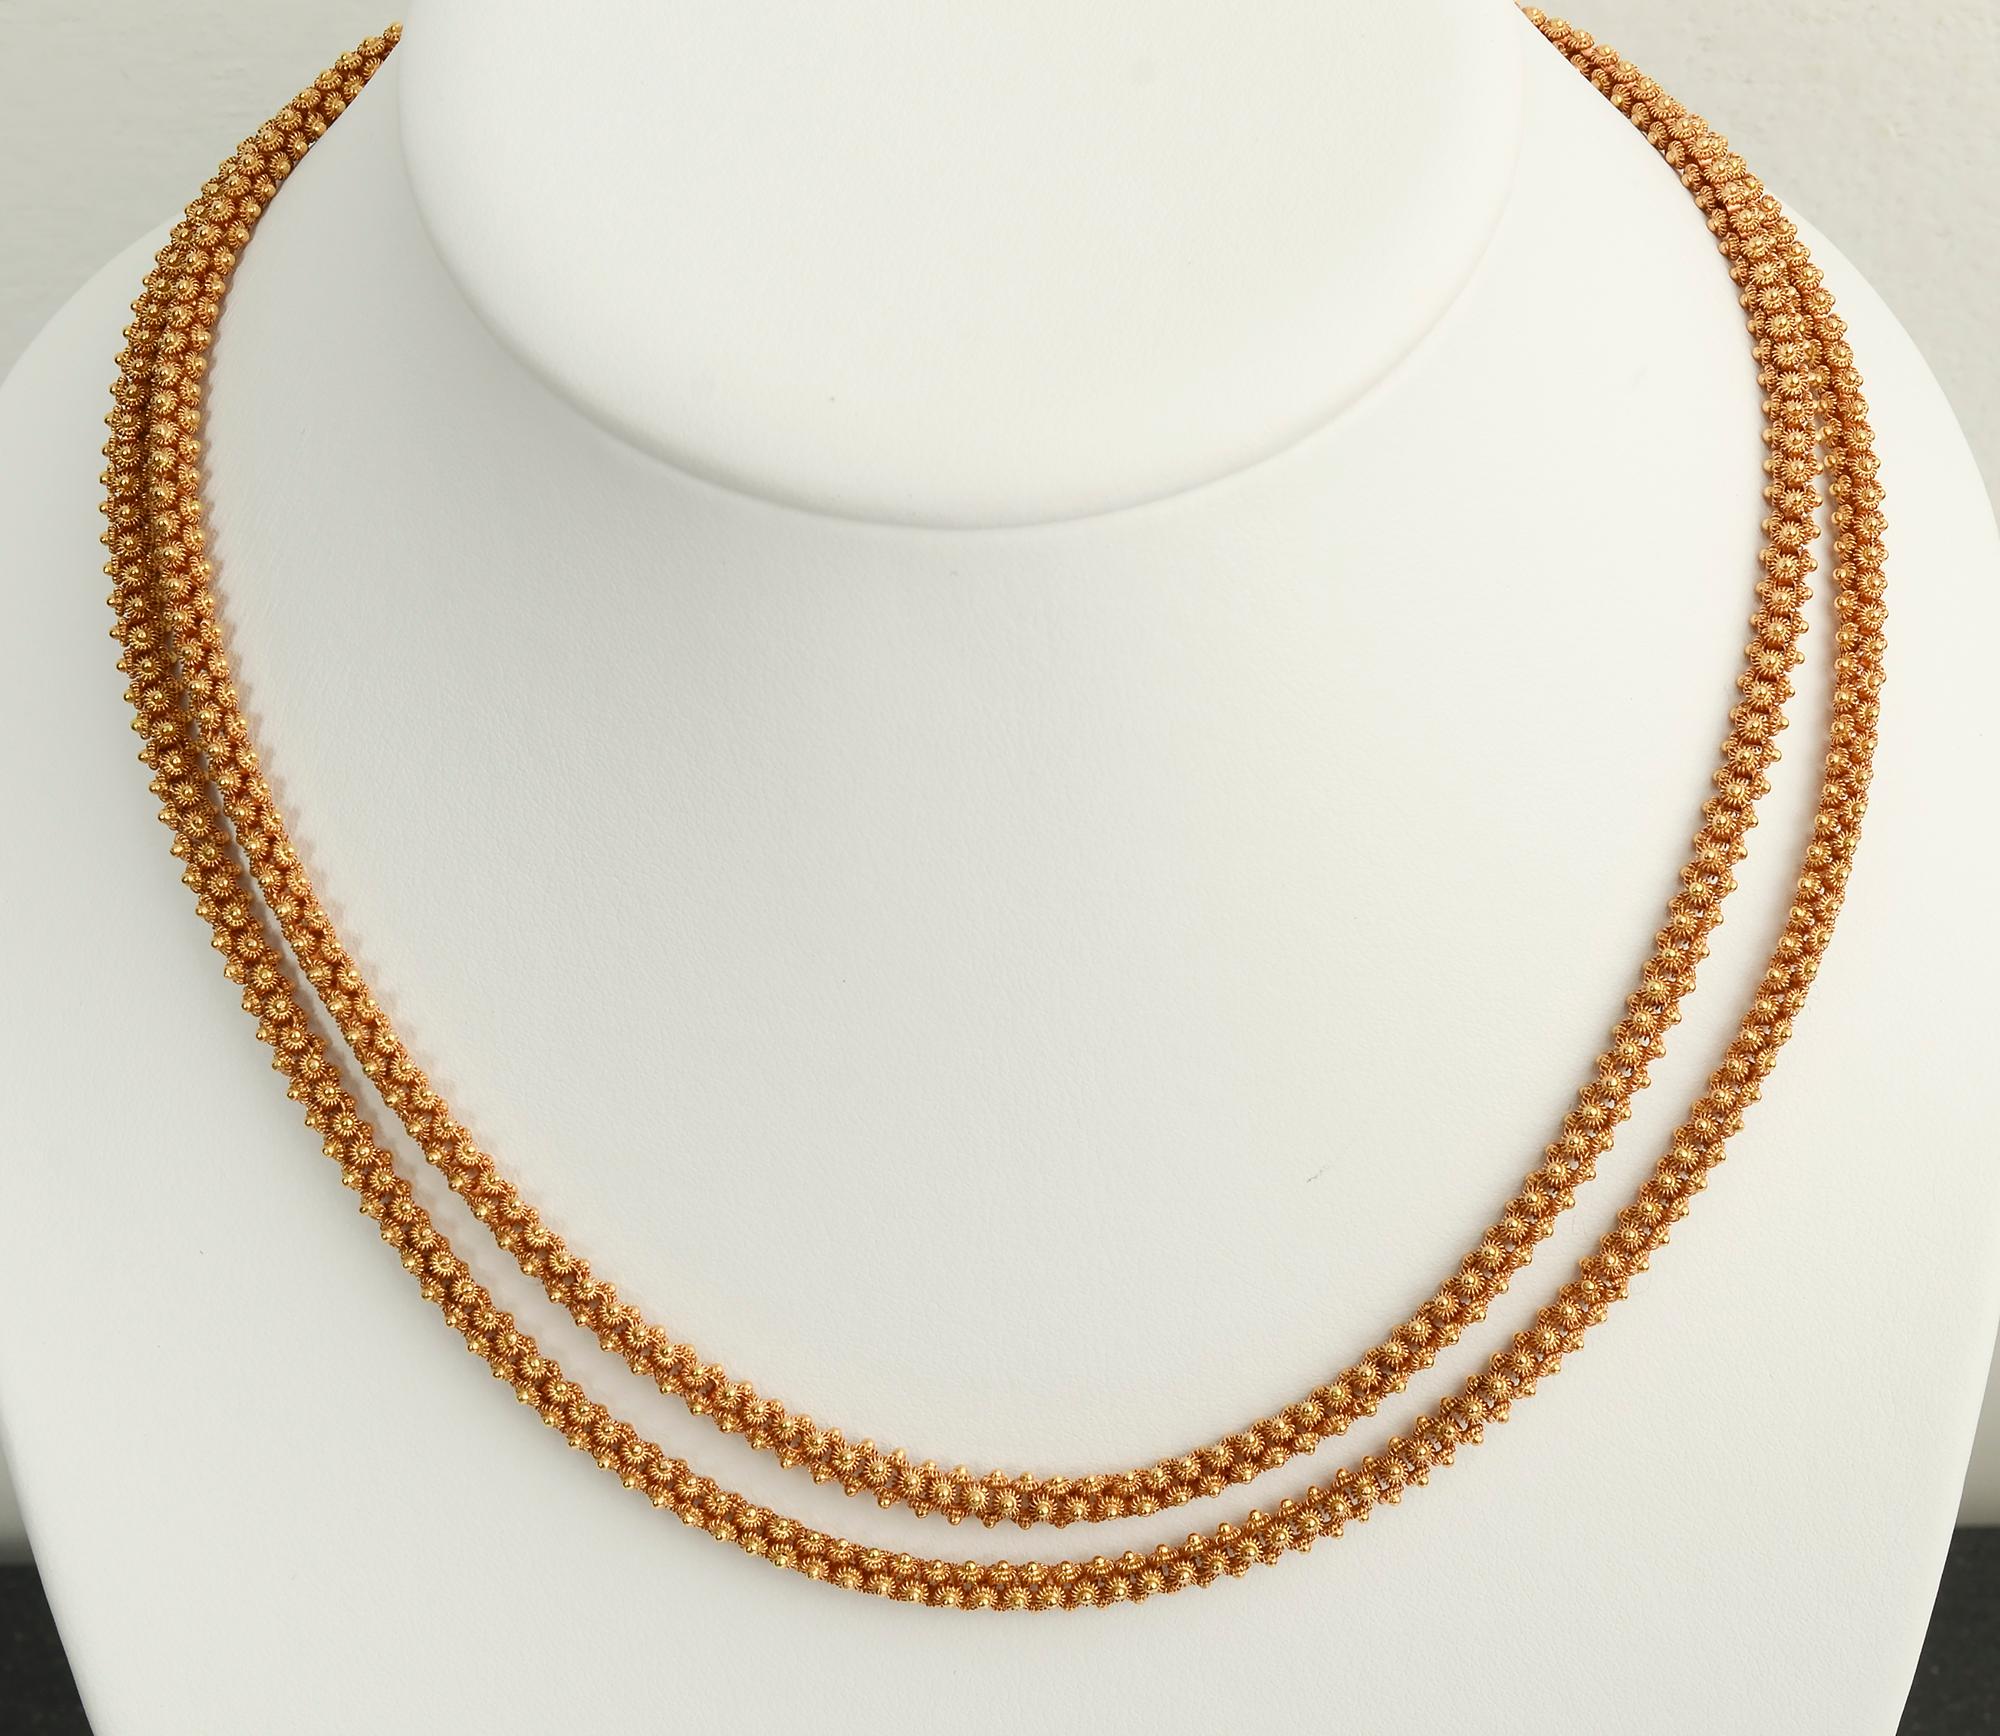 Extremely intricately made 18 karat long gold chain necklace. Each link consists of a tiny dome surrounded by curved spokes. Four of these elements make up a single link. The necklace is 36 inches long so it can comfortably be worn singly or doubled.